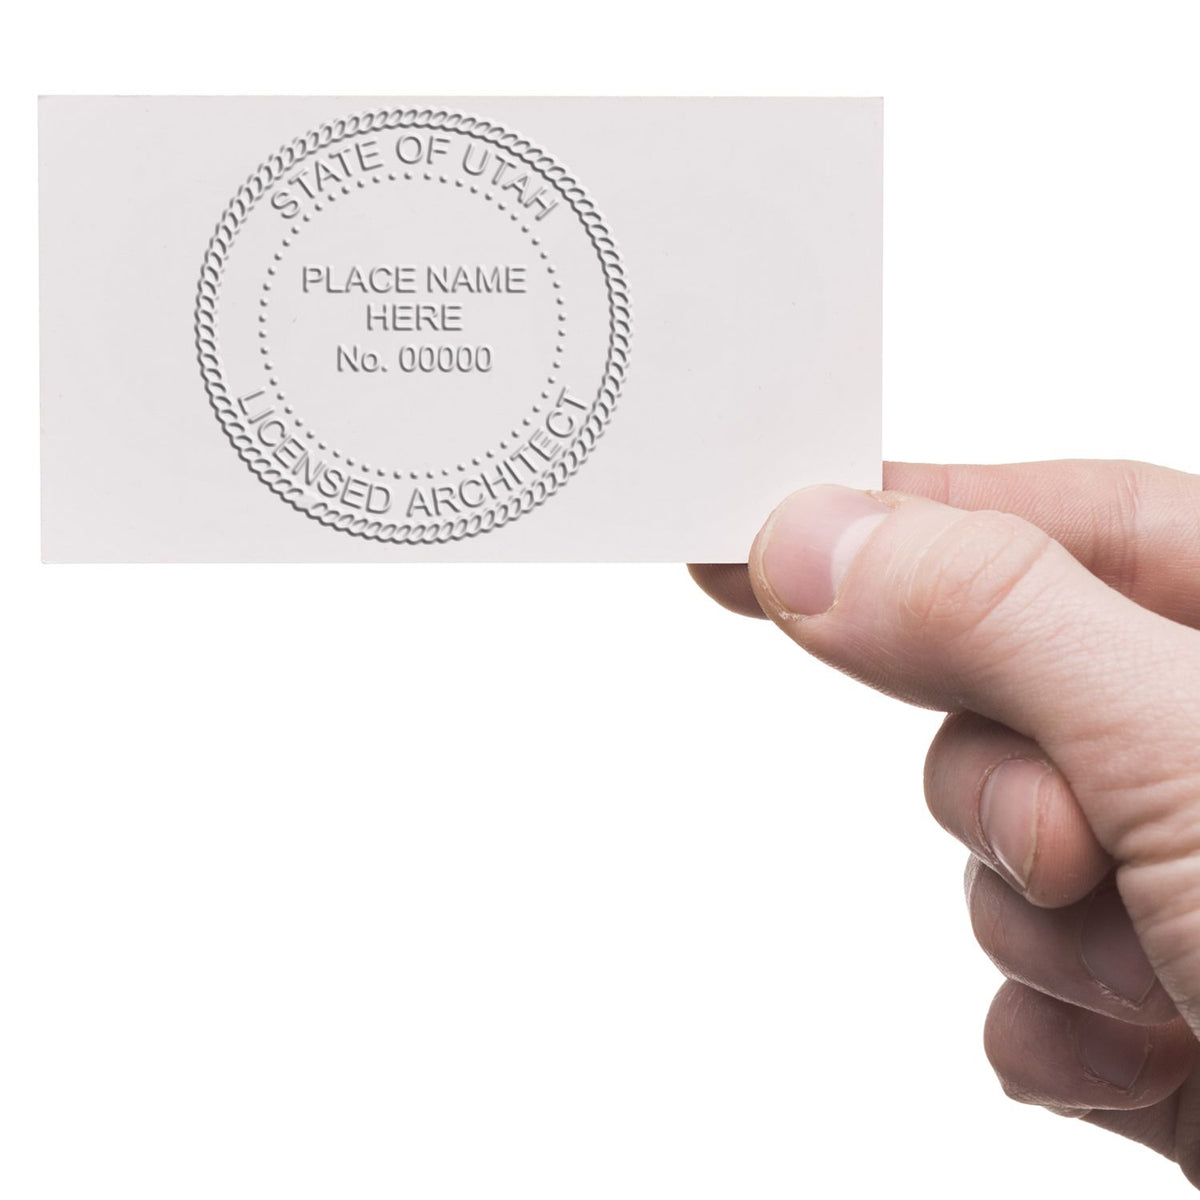 An in use photo of the Gift Utah Architect Seal showing a sample imprint on a cardstock